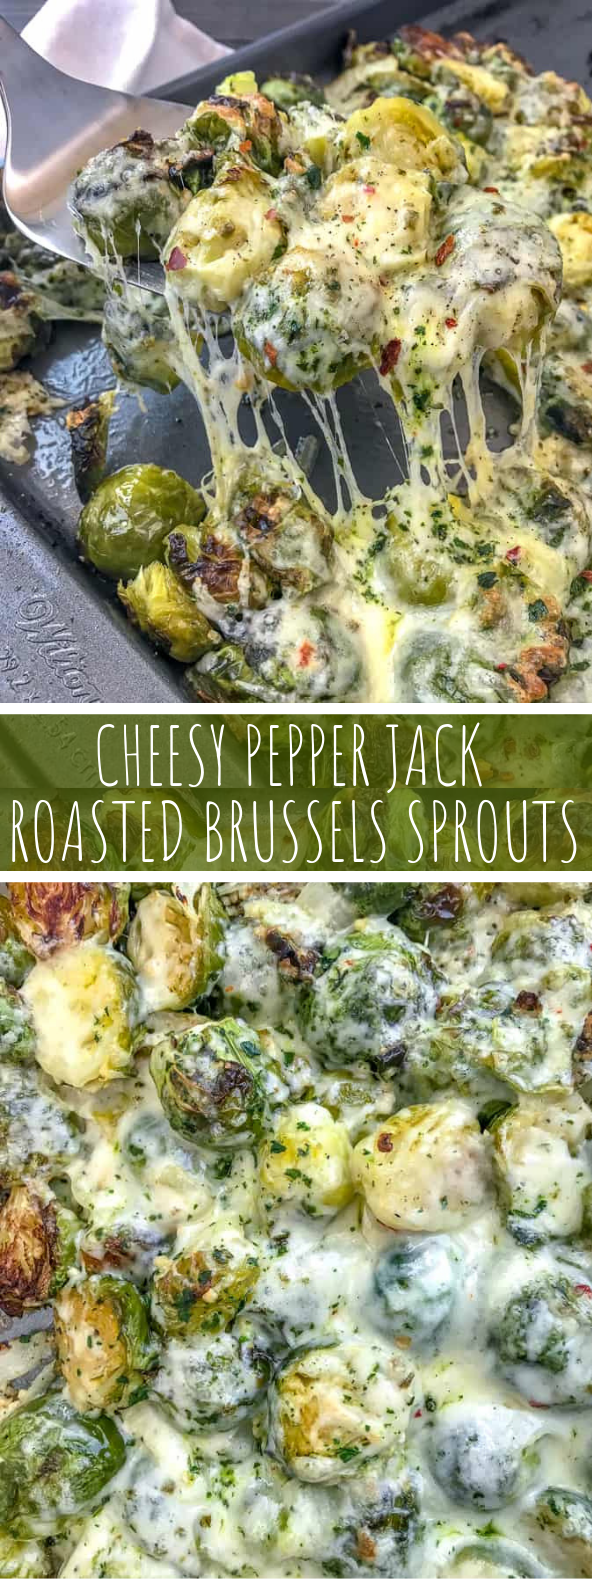 CHEESY PEPPER JACK ROASTED BRUSSELS SPROUTS #lowcarb #ketofriendly